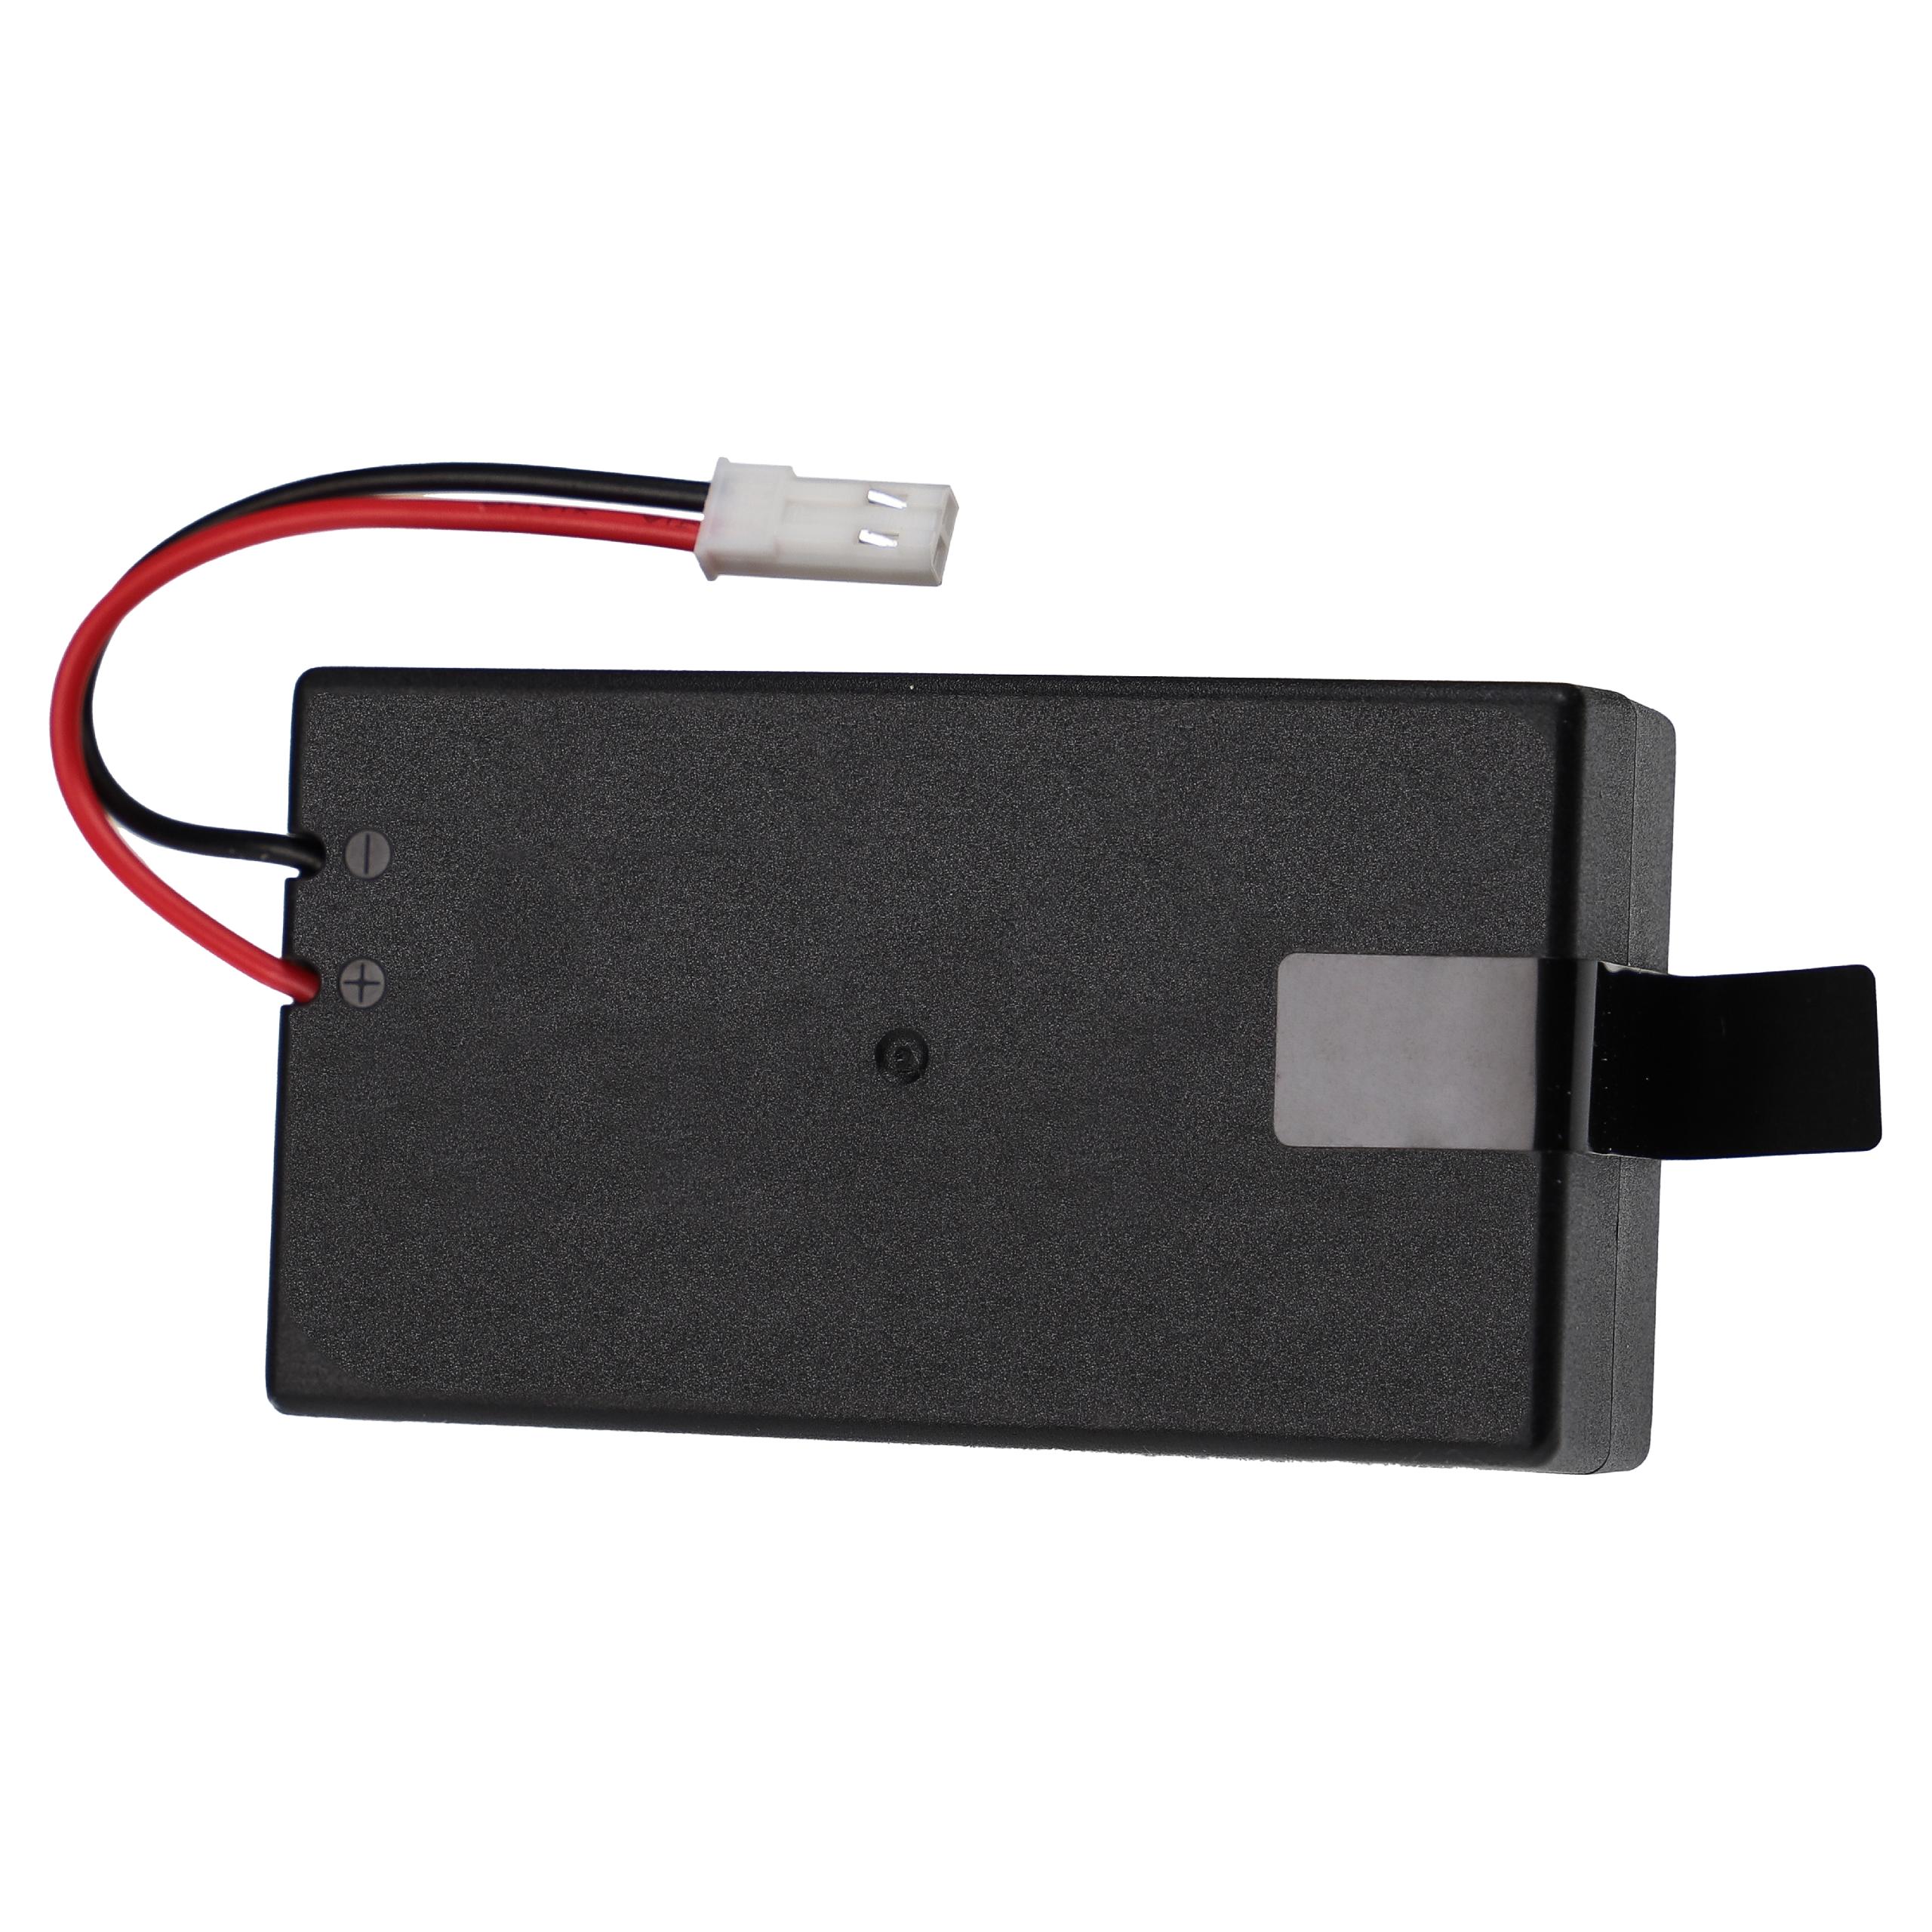 Model Making Device Battery Replacement for Yuneec YP-3 - 6800mAh 3.7V Li-Ion